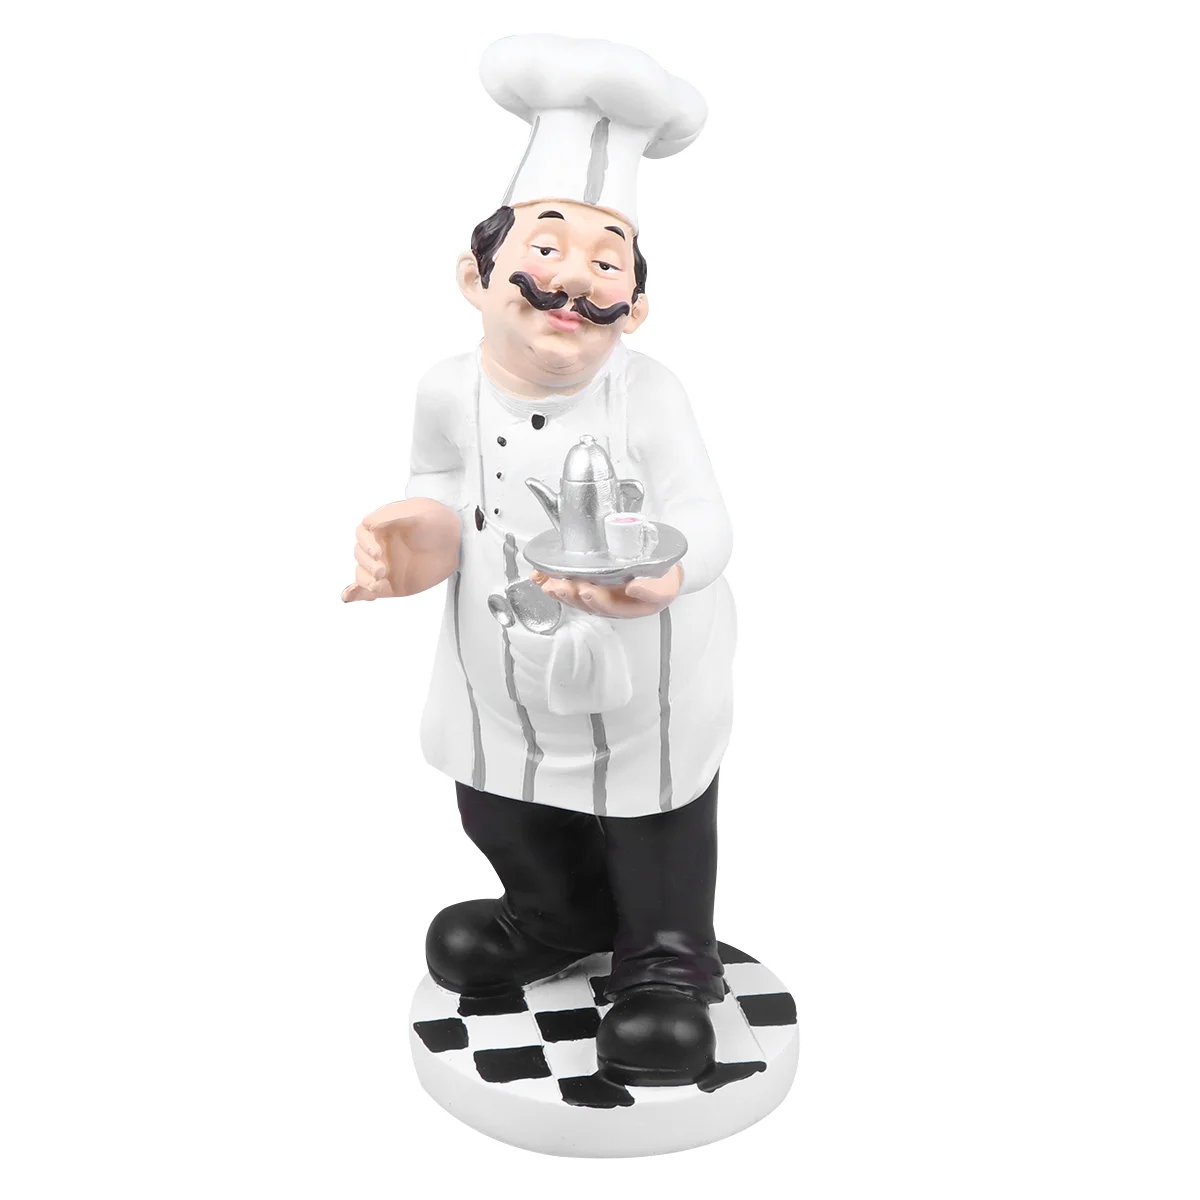 

Resin Chef Figures Statue Holding Red Wine Figurines Chef Statue Home Countertop Table Decoration Country Cottage Decor Gourmet